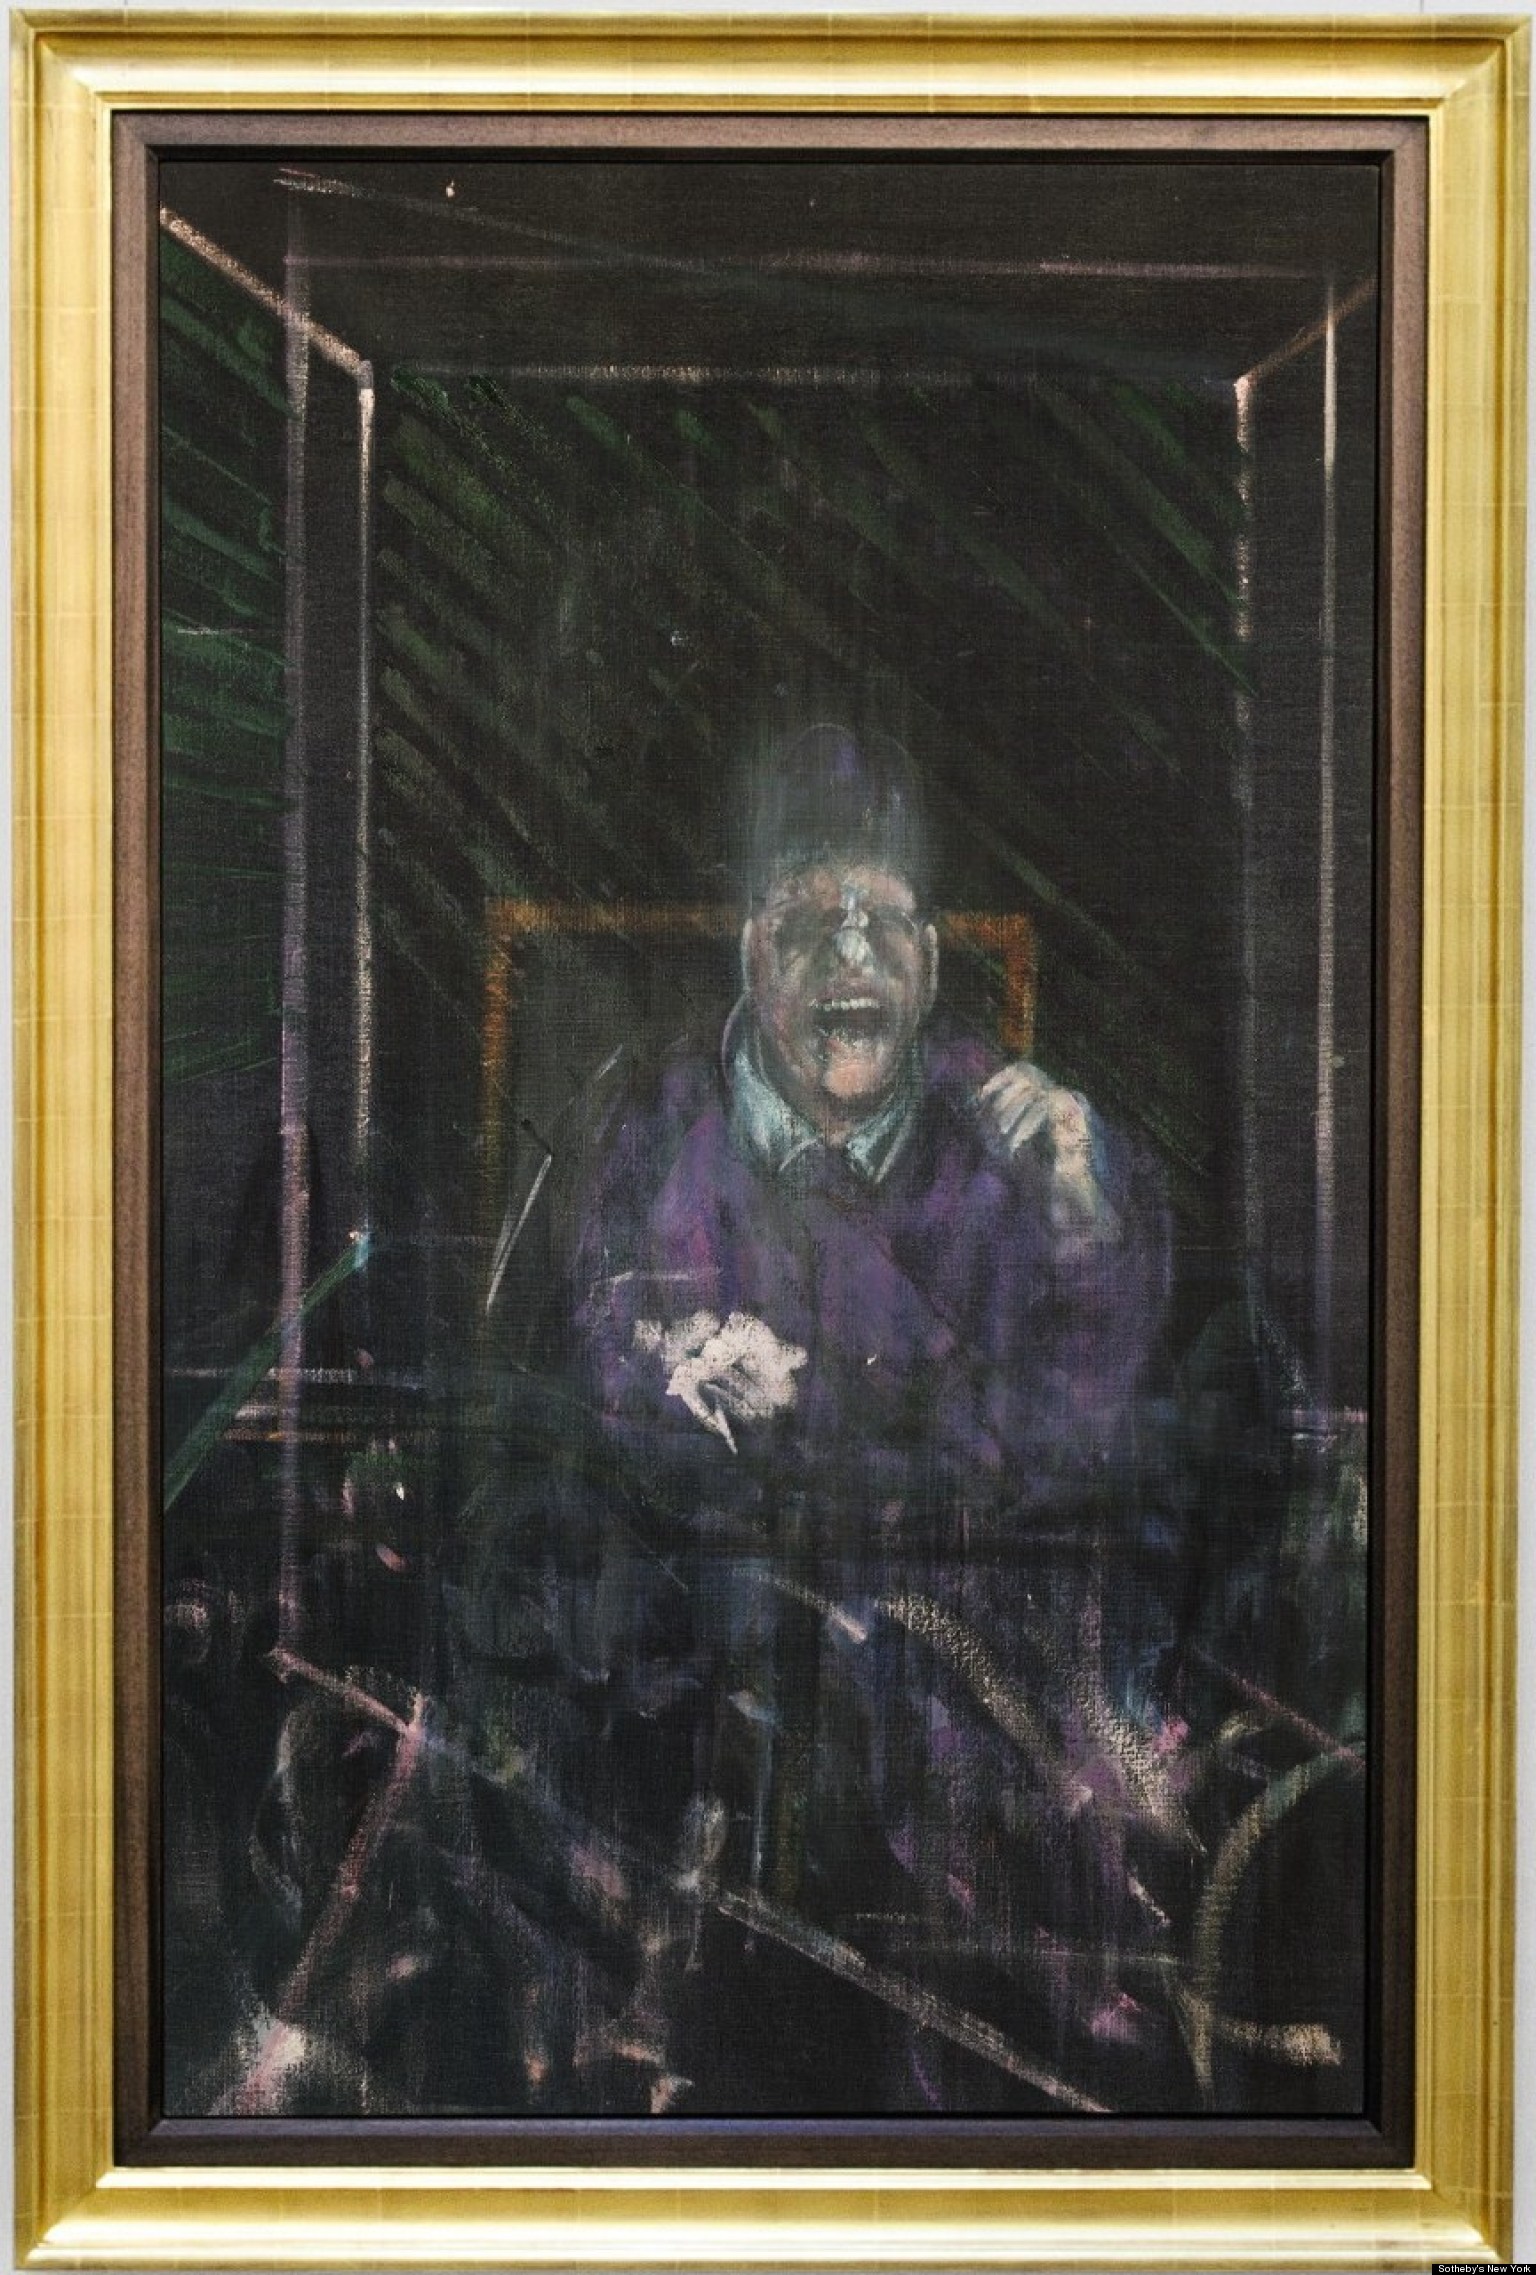 Francis Bacon's Acclaimed 'Pope' Heads To Sotheby's After 40 Years Out